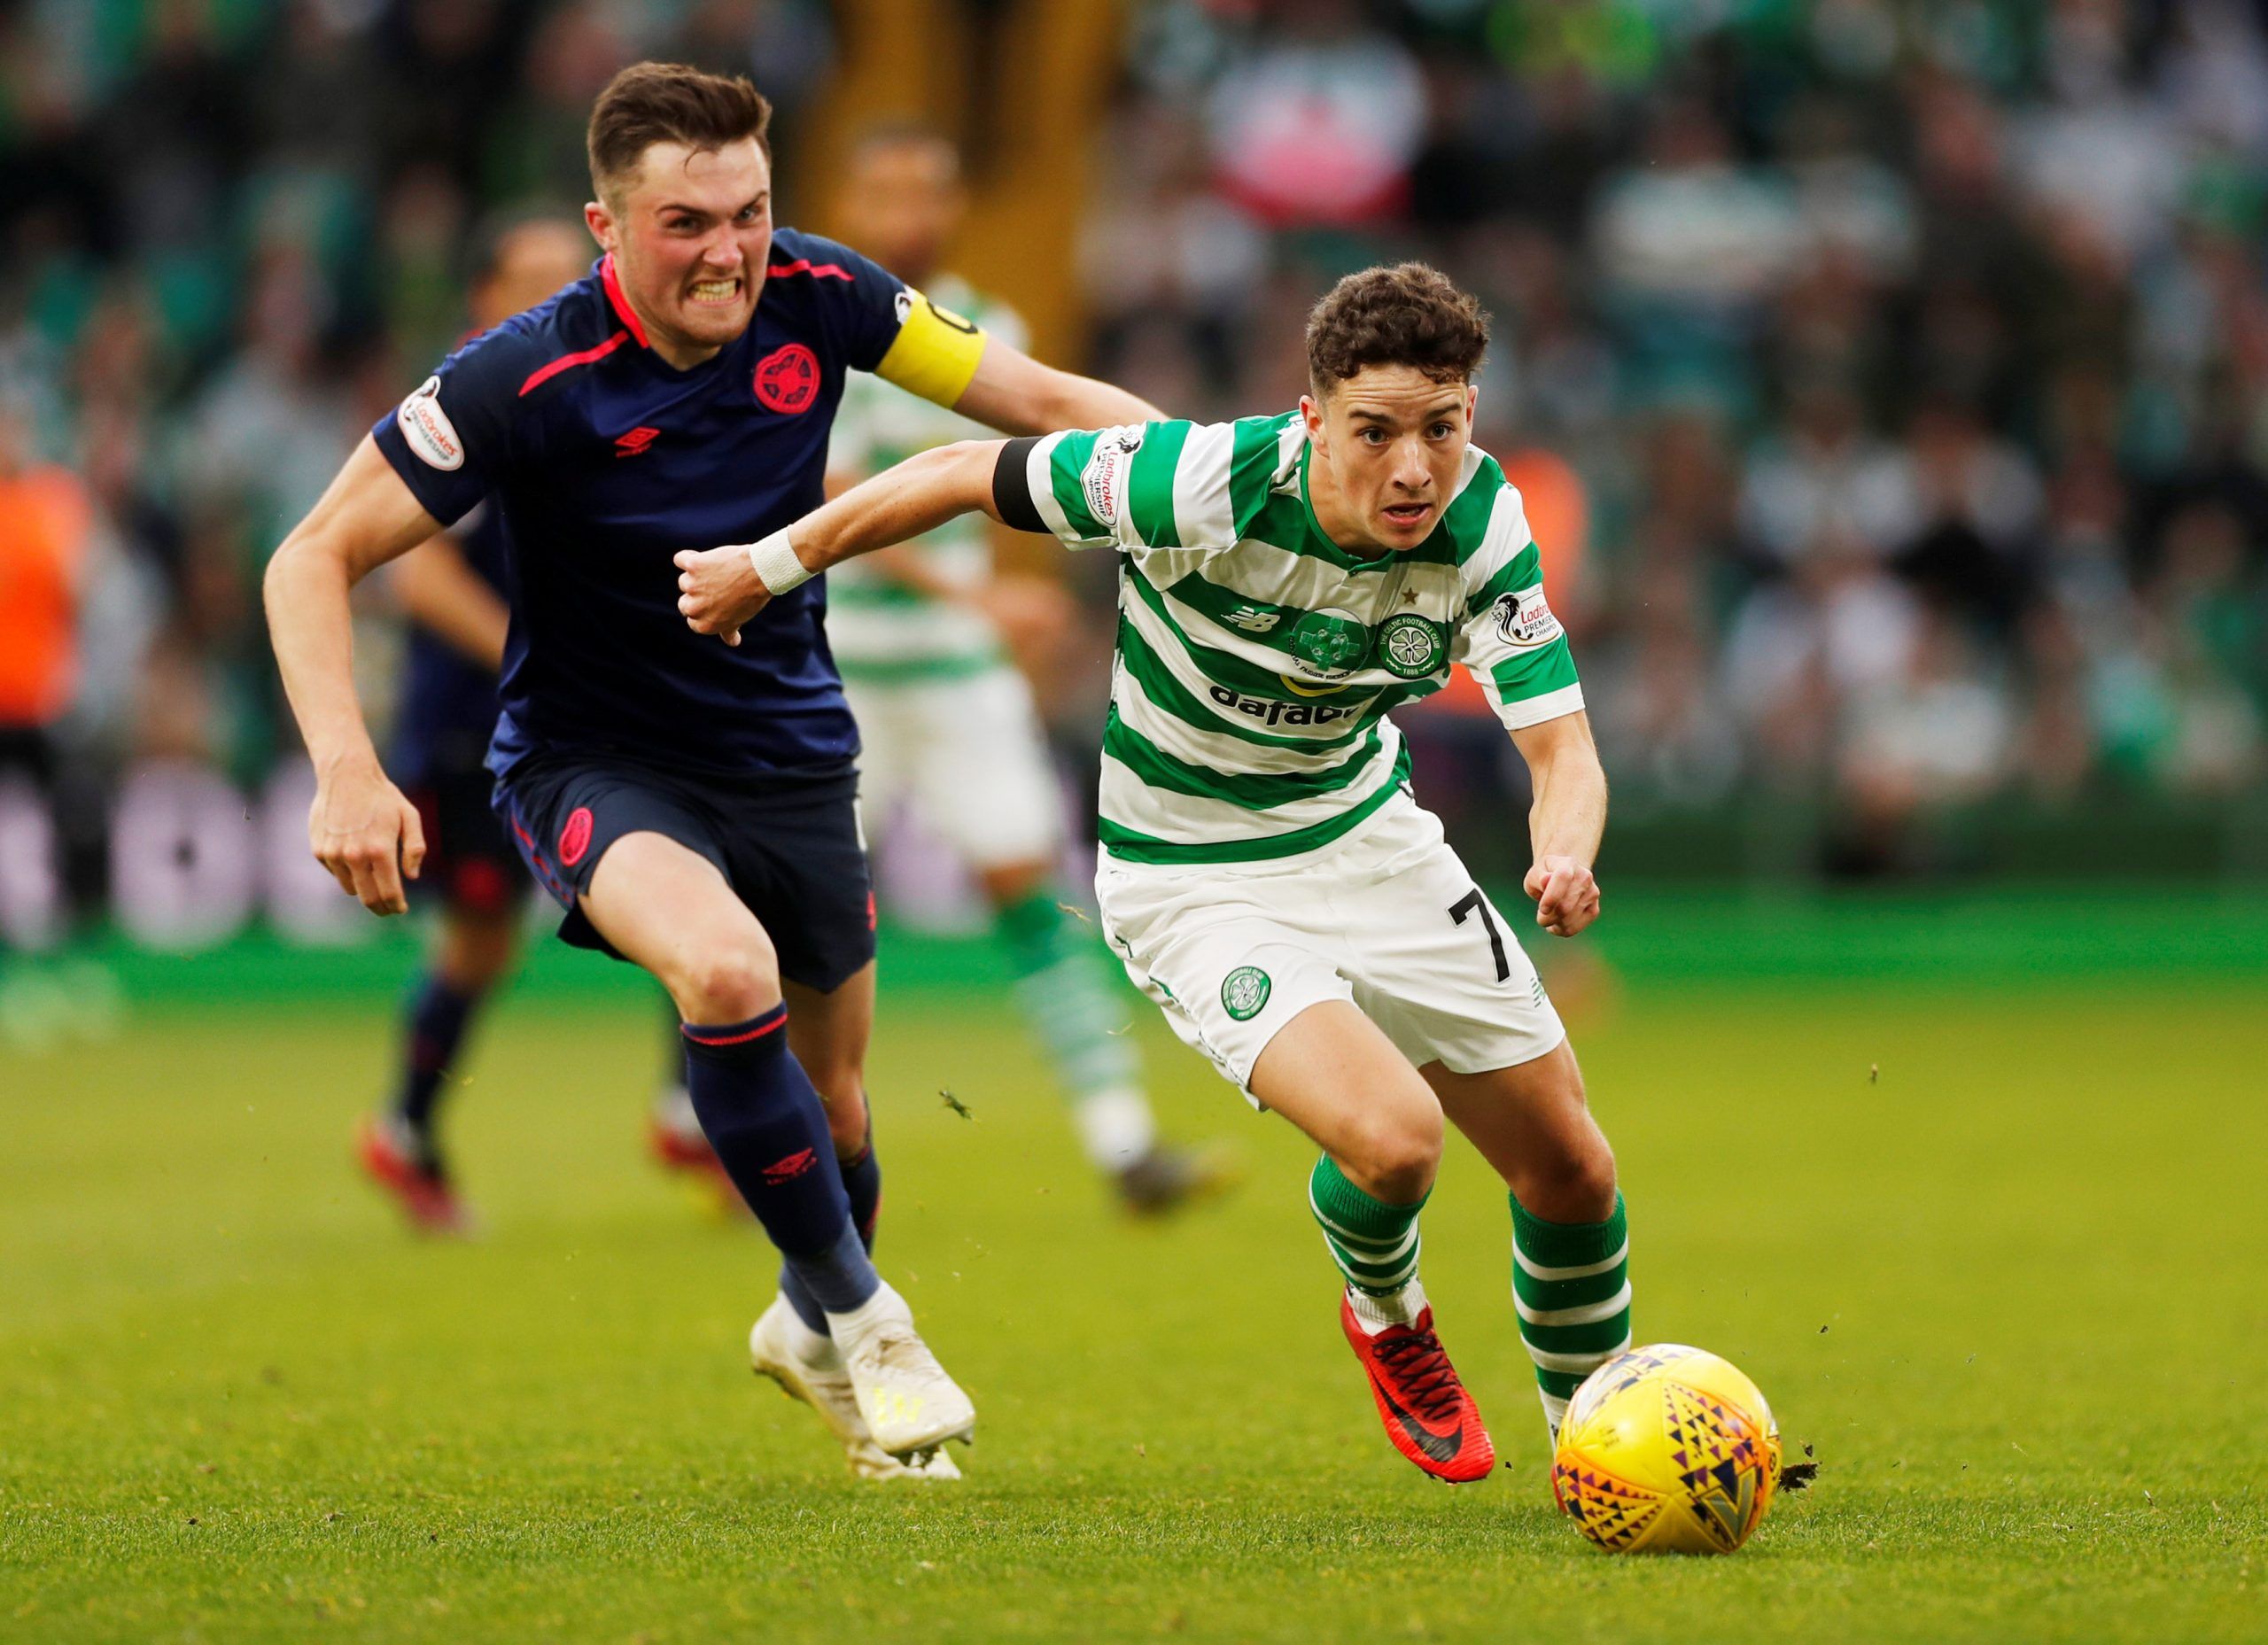 Soccer Football - Premiership - Celtic v Heart of Midlothian - Celtic Park, Glasgow, Britain - May 19, 2019  Celtic's Mikey Johnston in action with Heart of Midlothian's John Souttar  Action Images via Reuters/Lee Smith